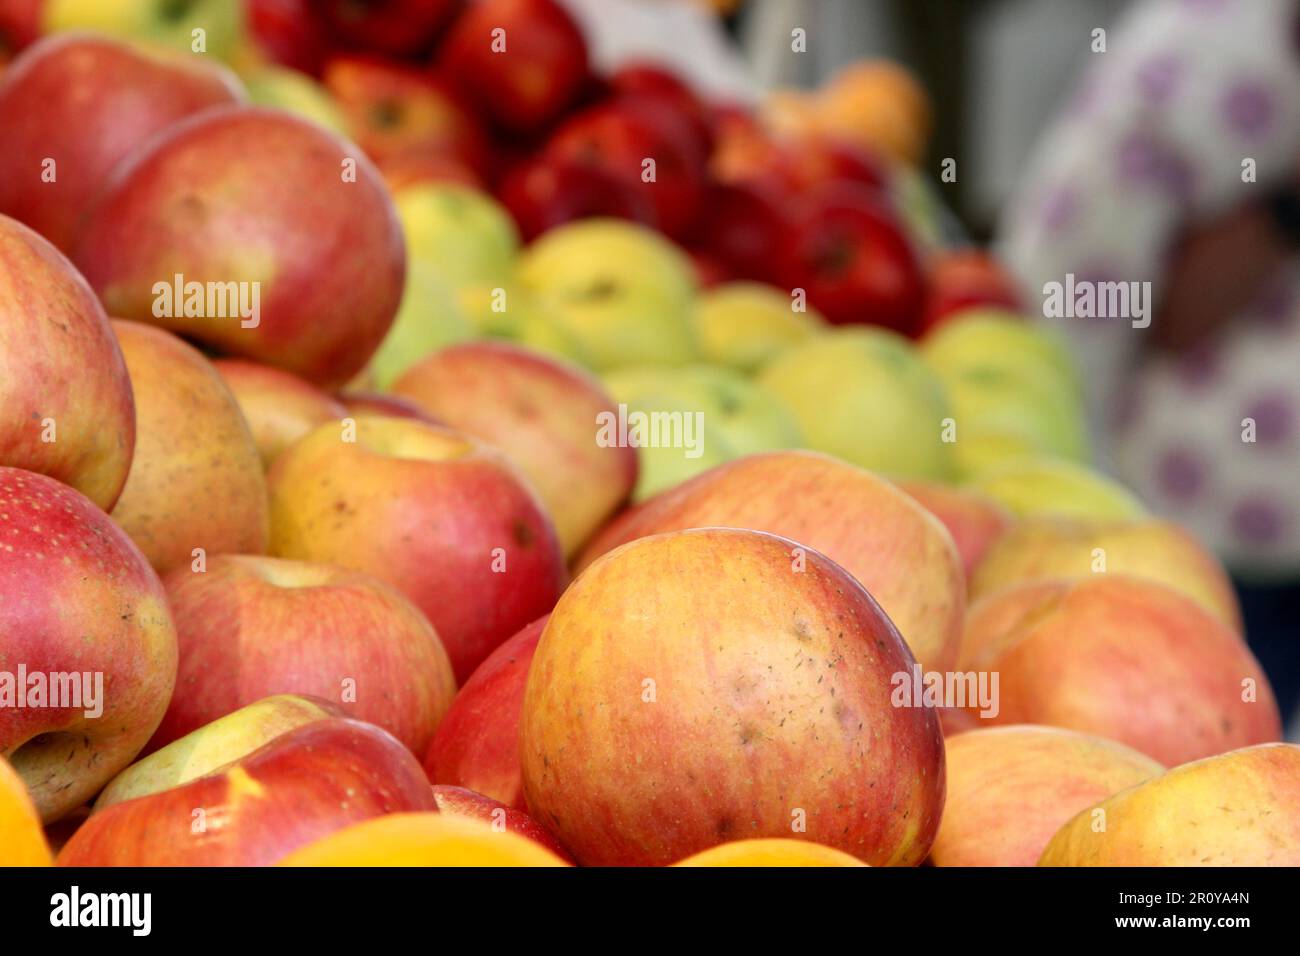 Apples on sale in a French supermarket Stock Photo